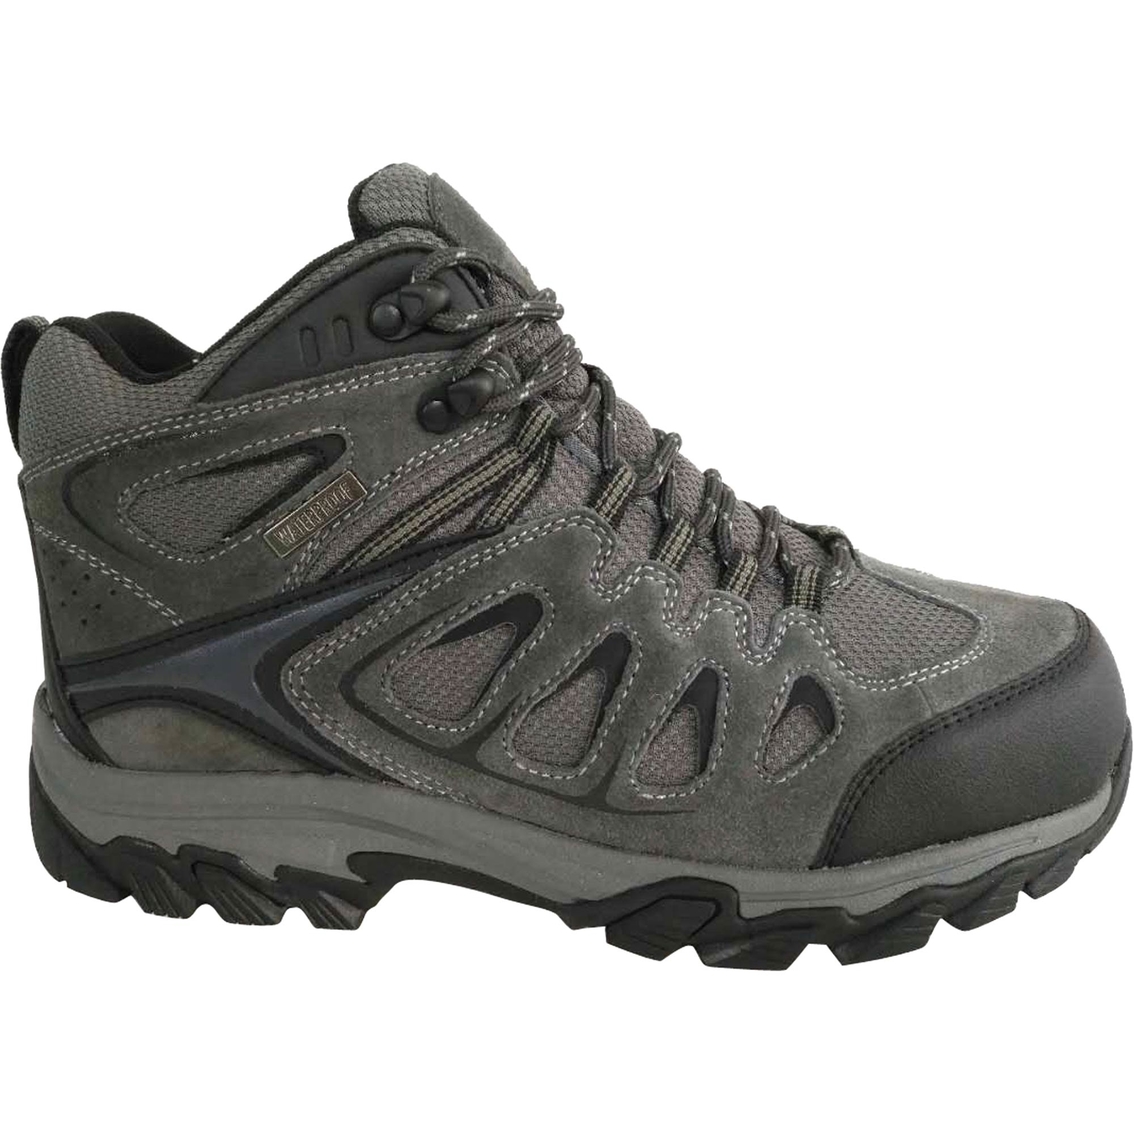 Nord Trail Mount Logan Waterproof Hiking Boots | Hiking & Trail | Shoes ...